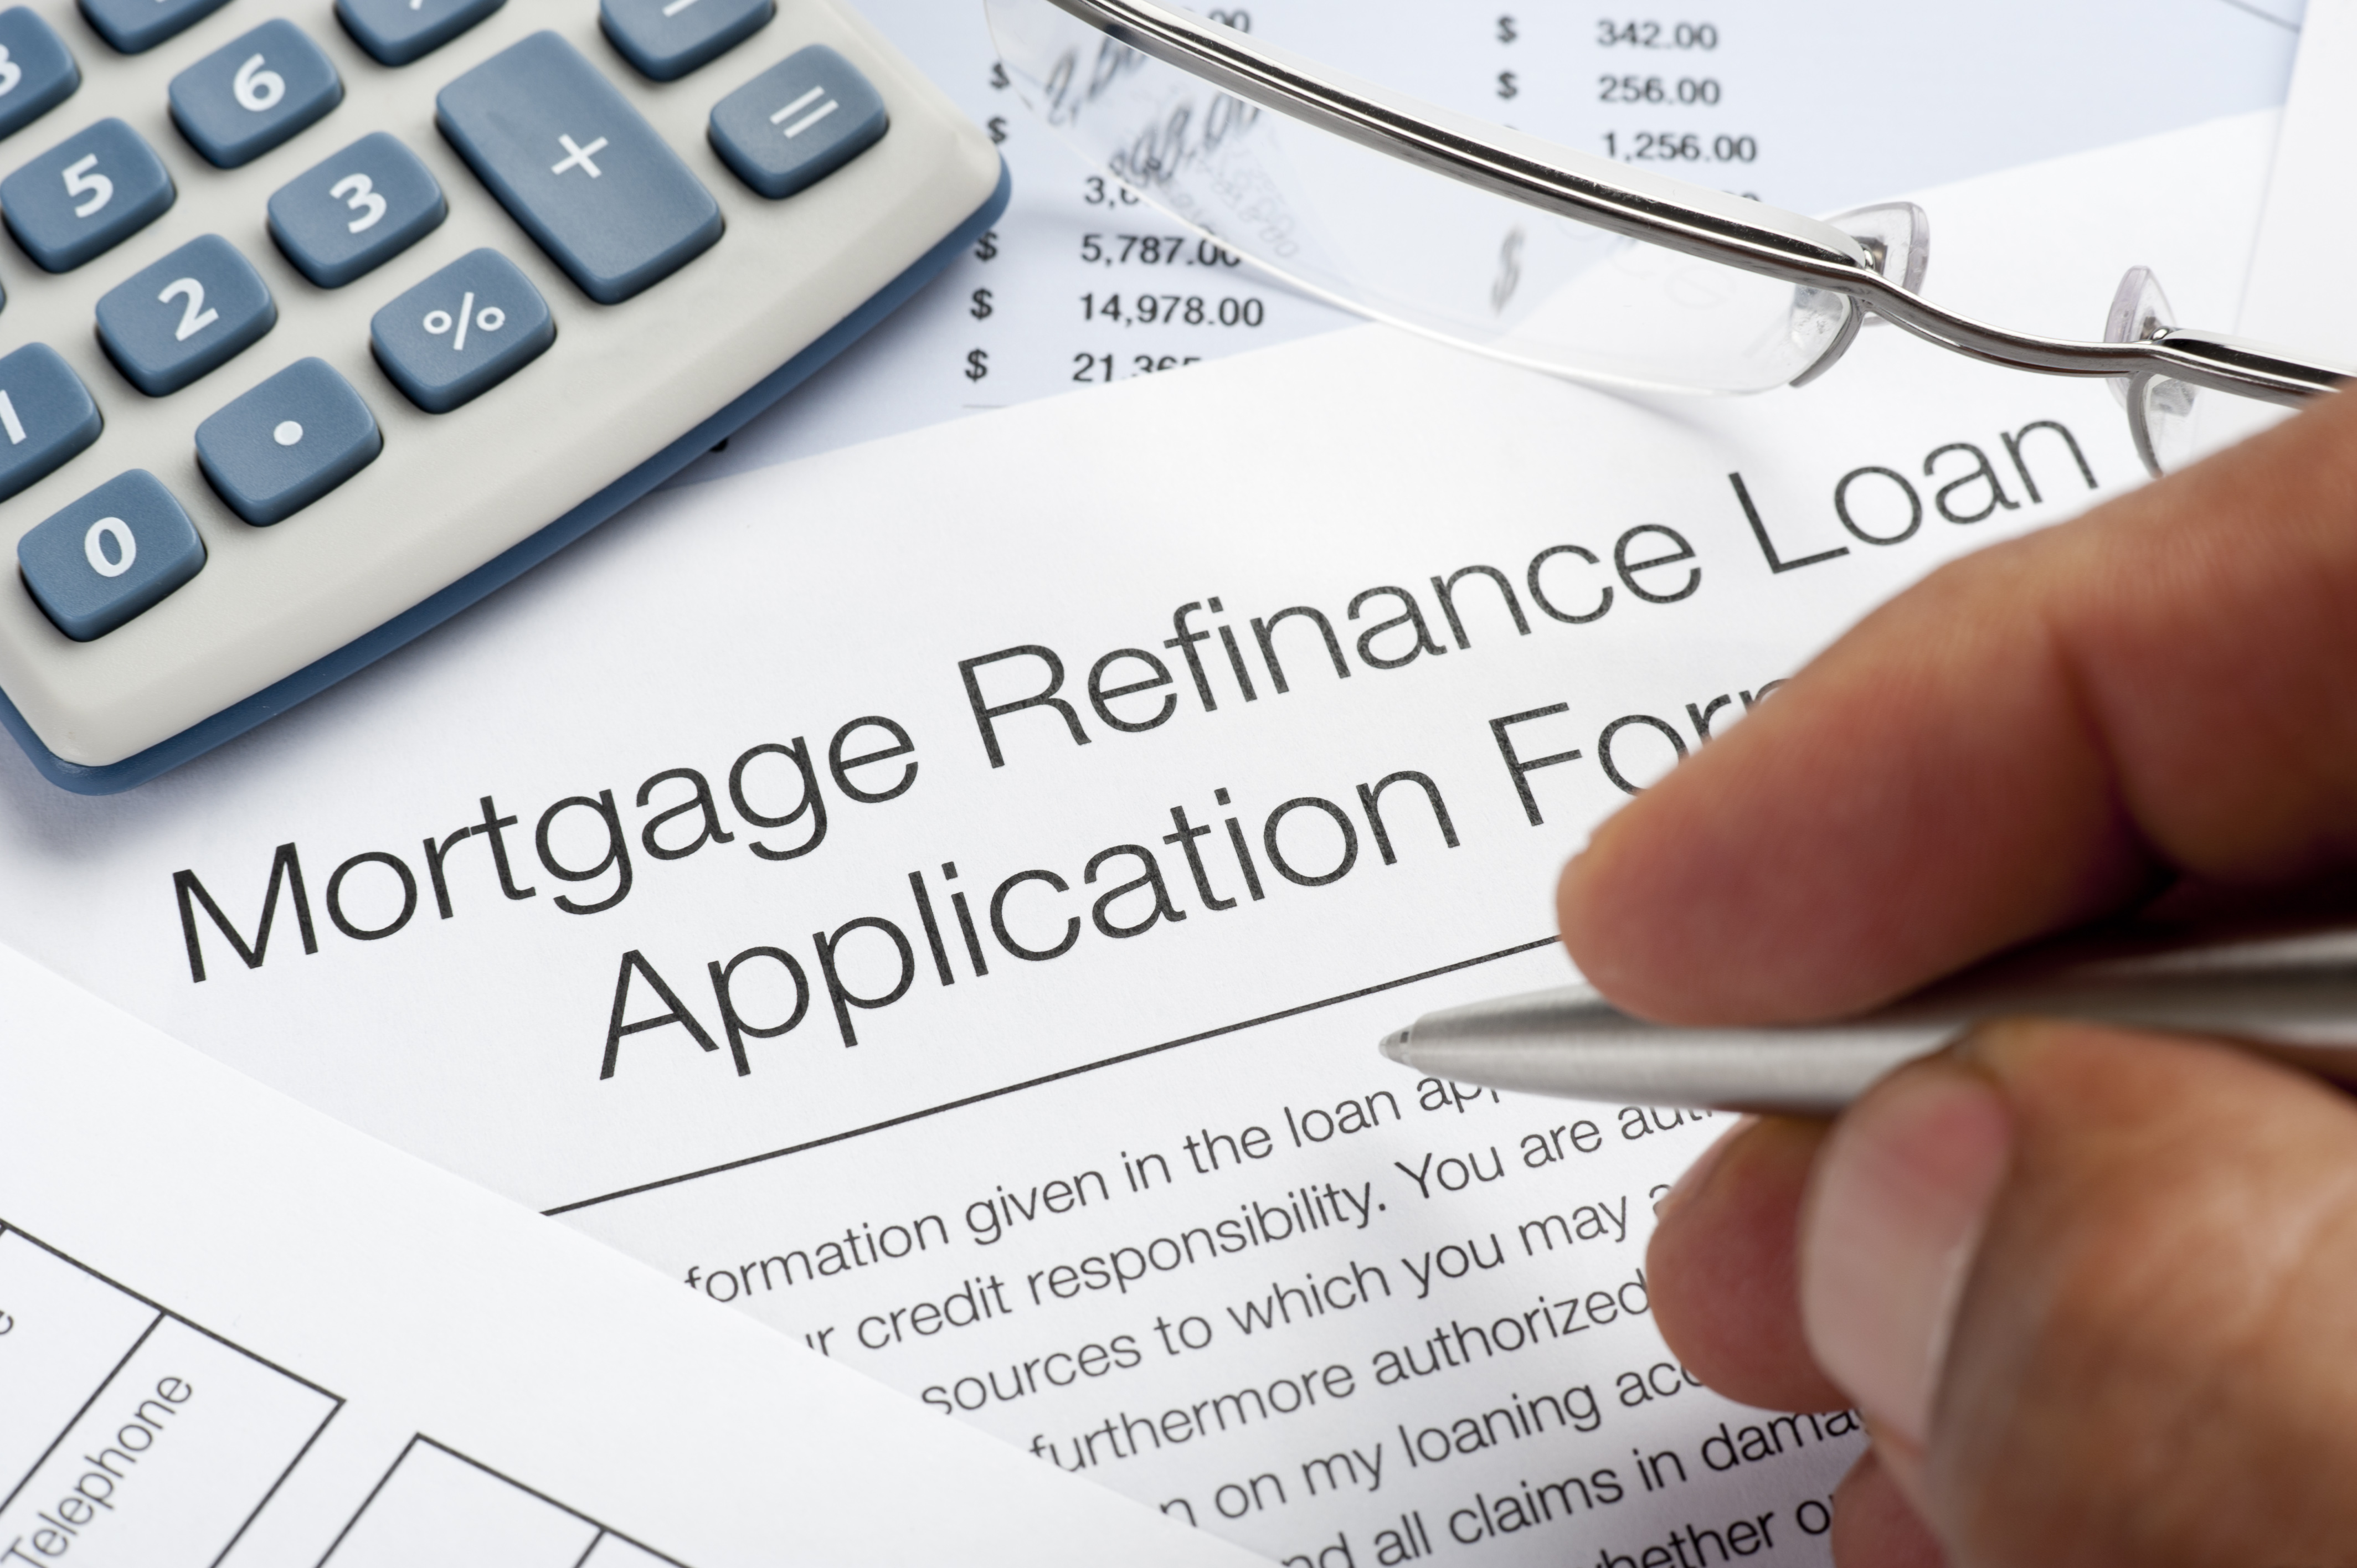 Mortgage Broker Fee Agreement Should I Use A Mortgage Broker To Refinance Finance Zacks